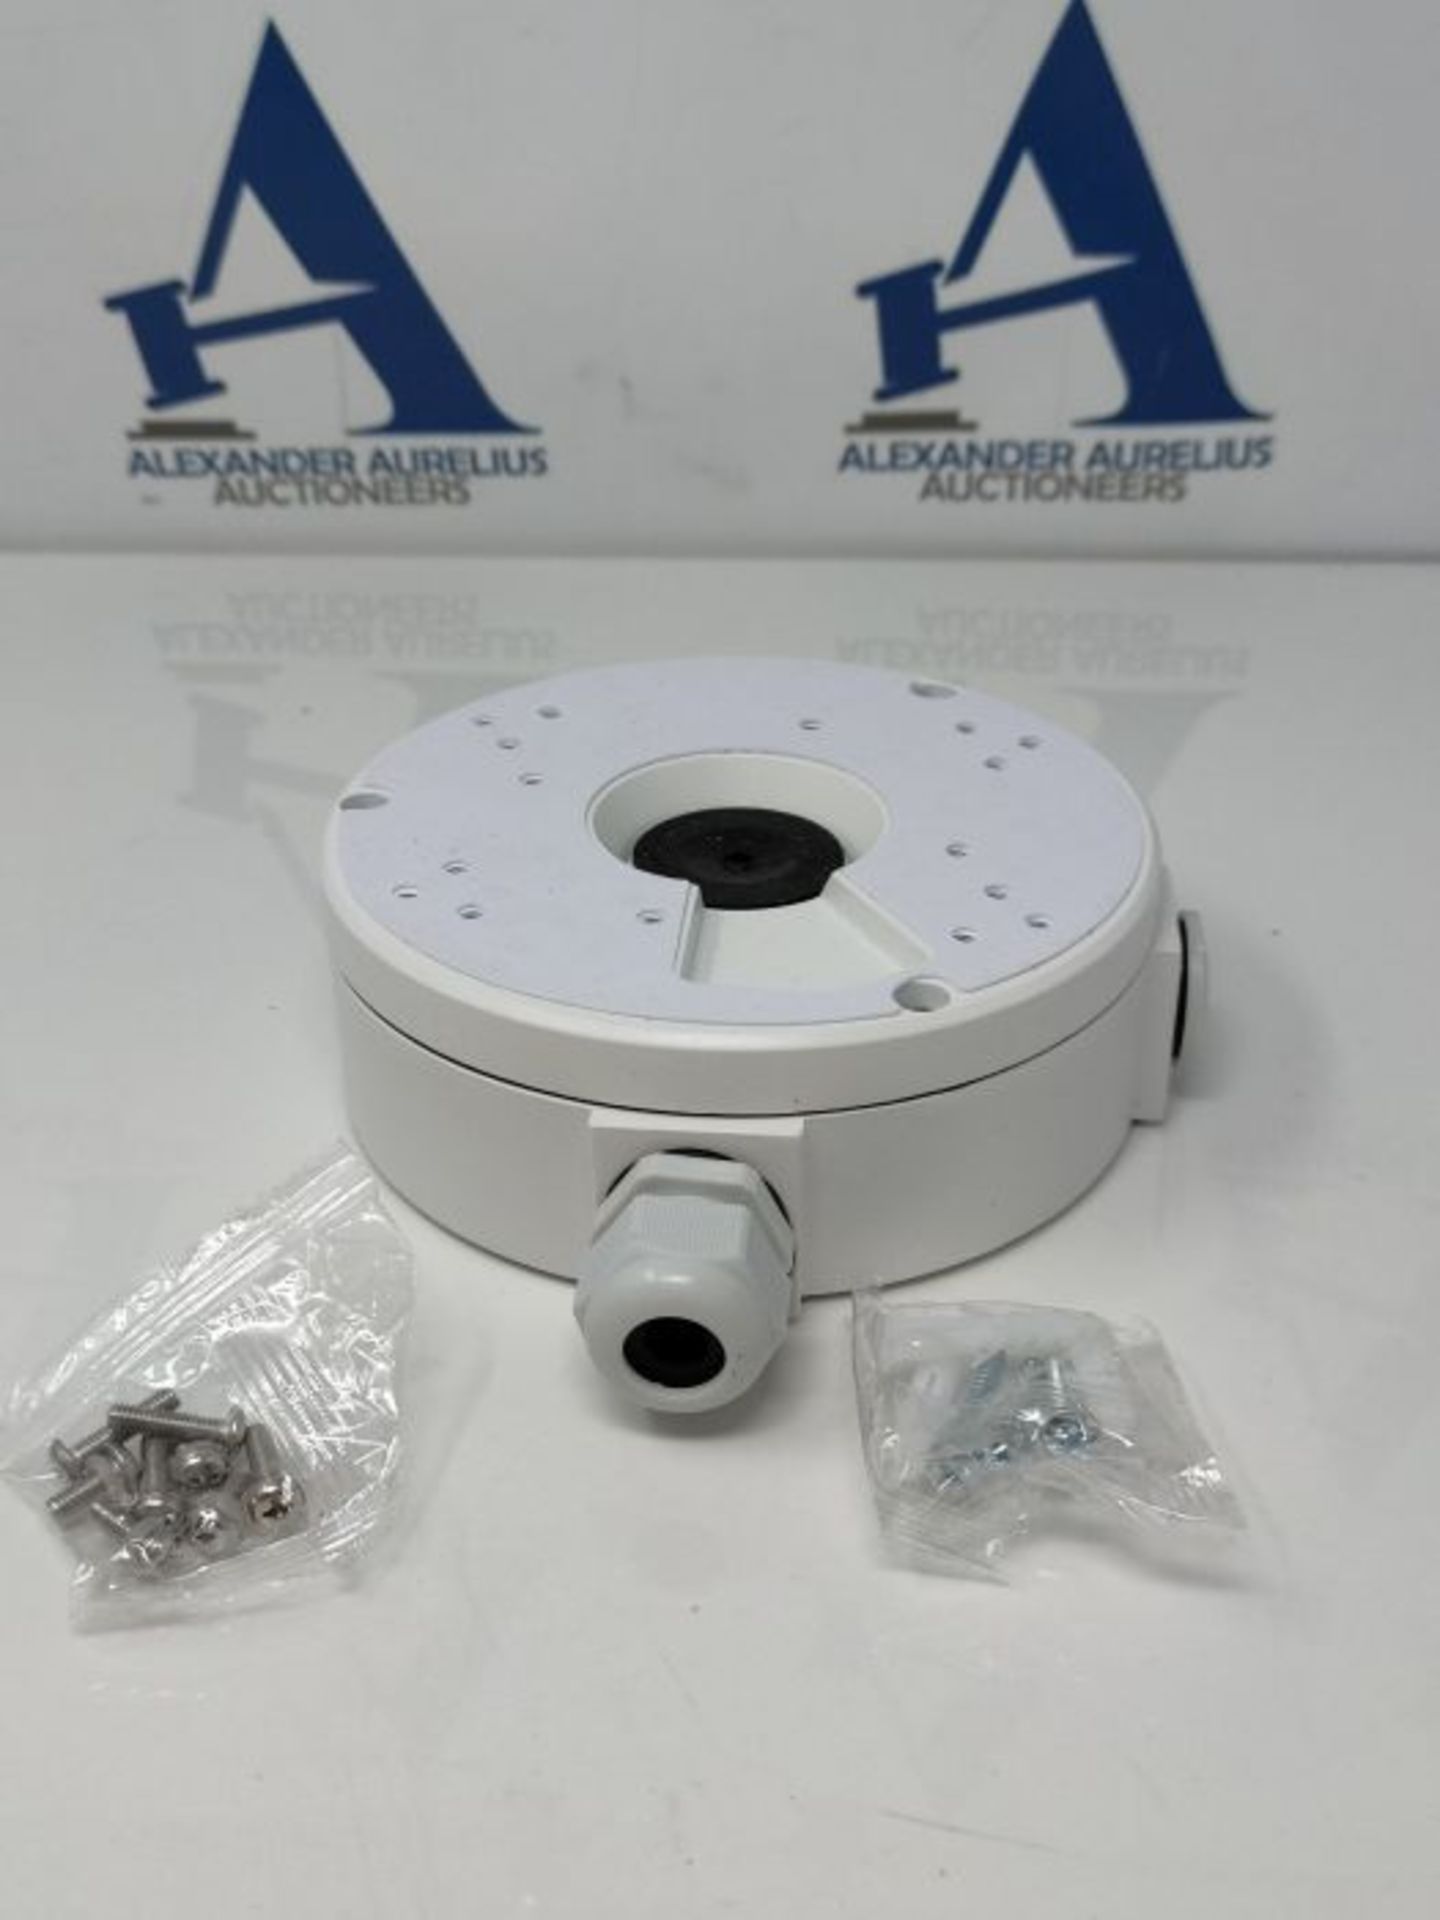 Reolink Junction Box D20, Only Designed for Reolink Dome IP Cameras RLC-520A, RLC-820A - Image 3 of 3